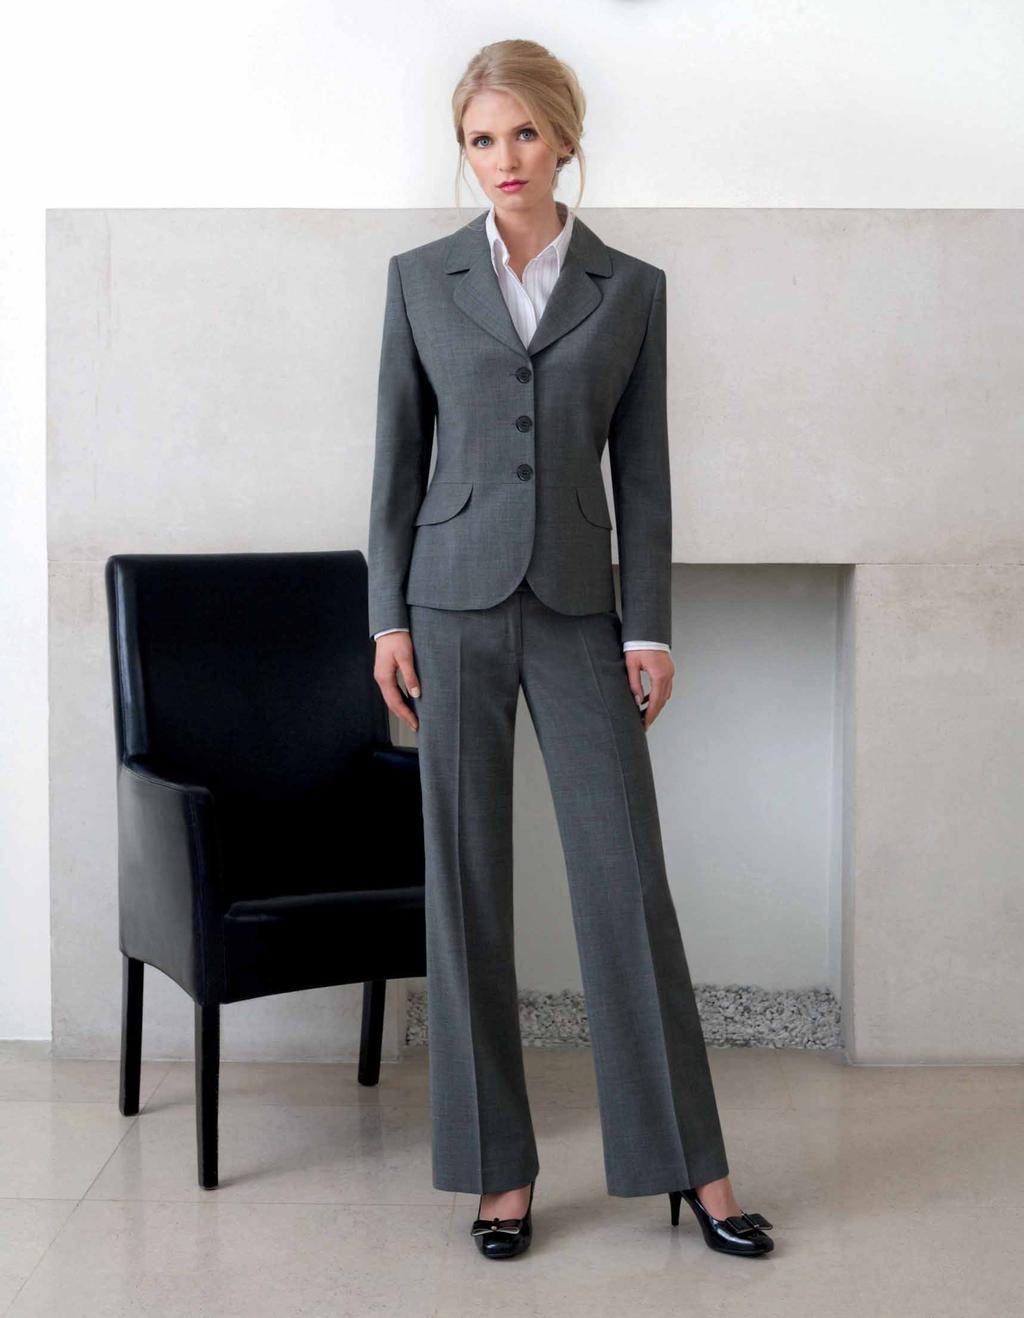 SOPHISTICATED Collection Susa Jacket (Light Grey) 3 button jacket, rounded lapel and pockets, plain back. 1 inside pocket.